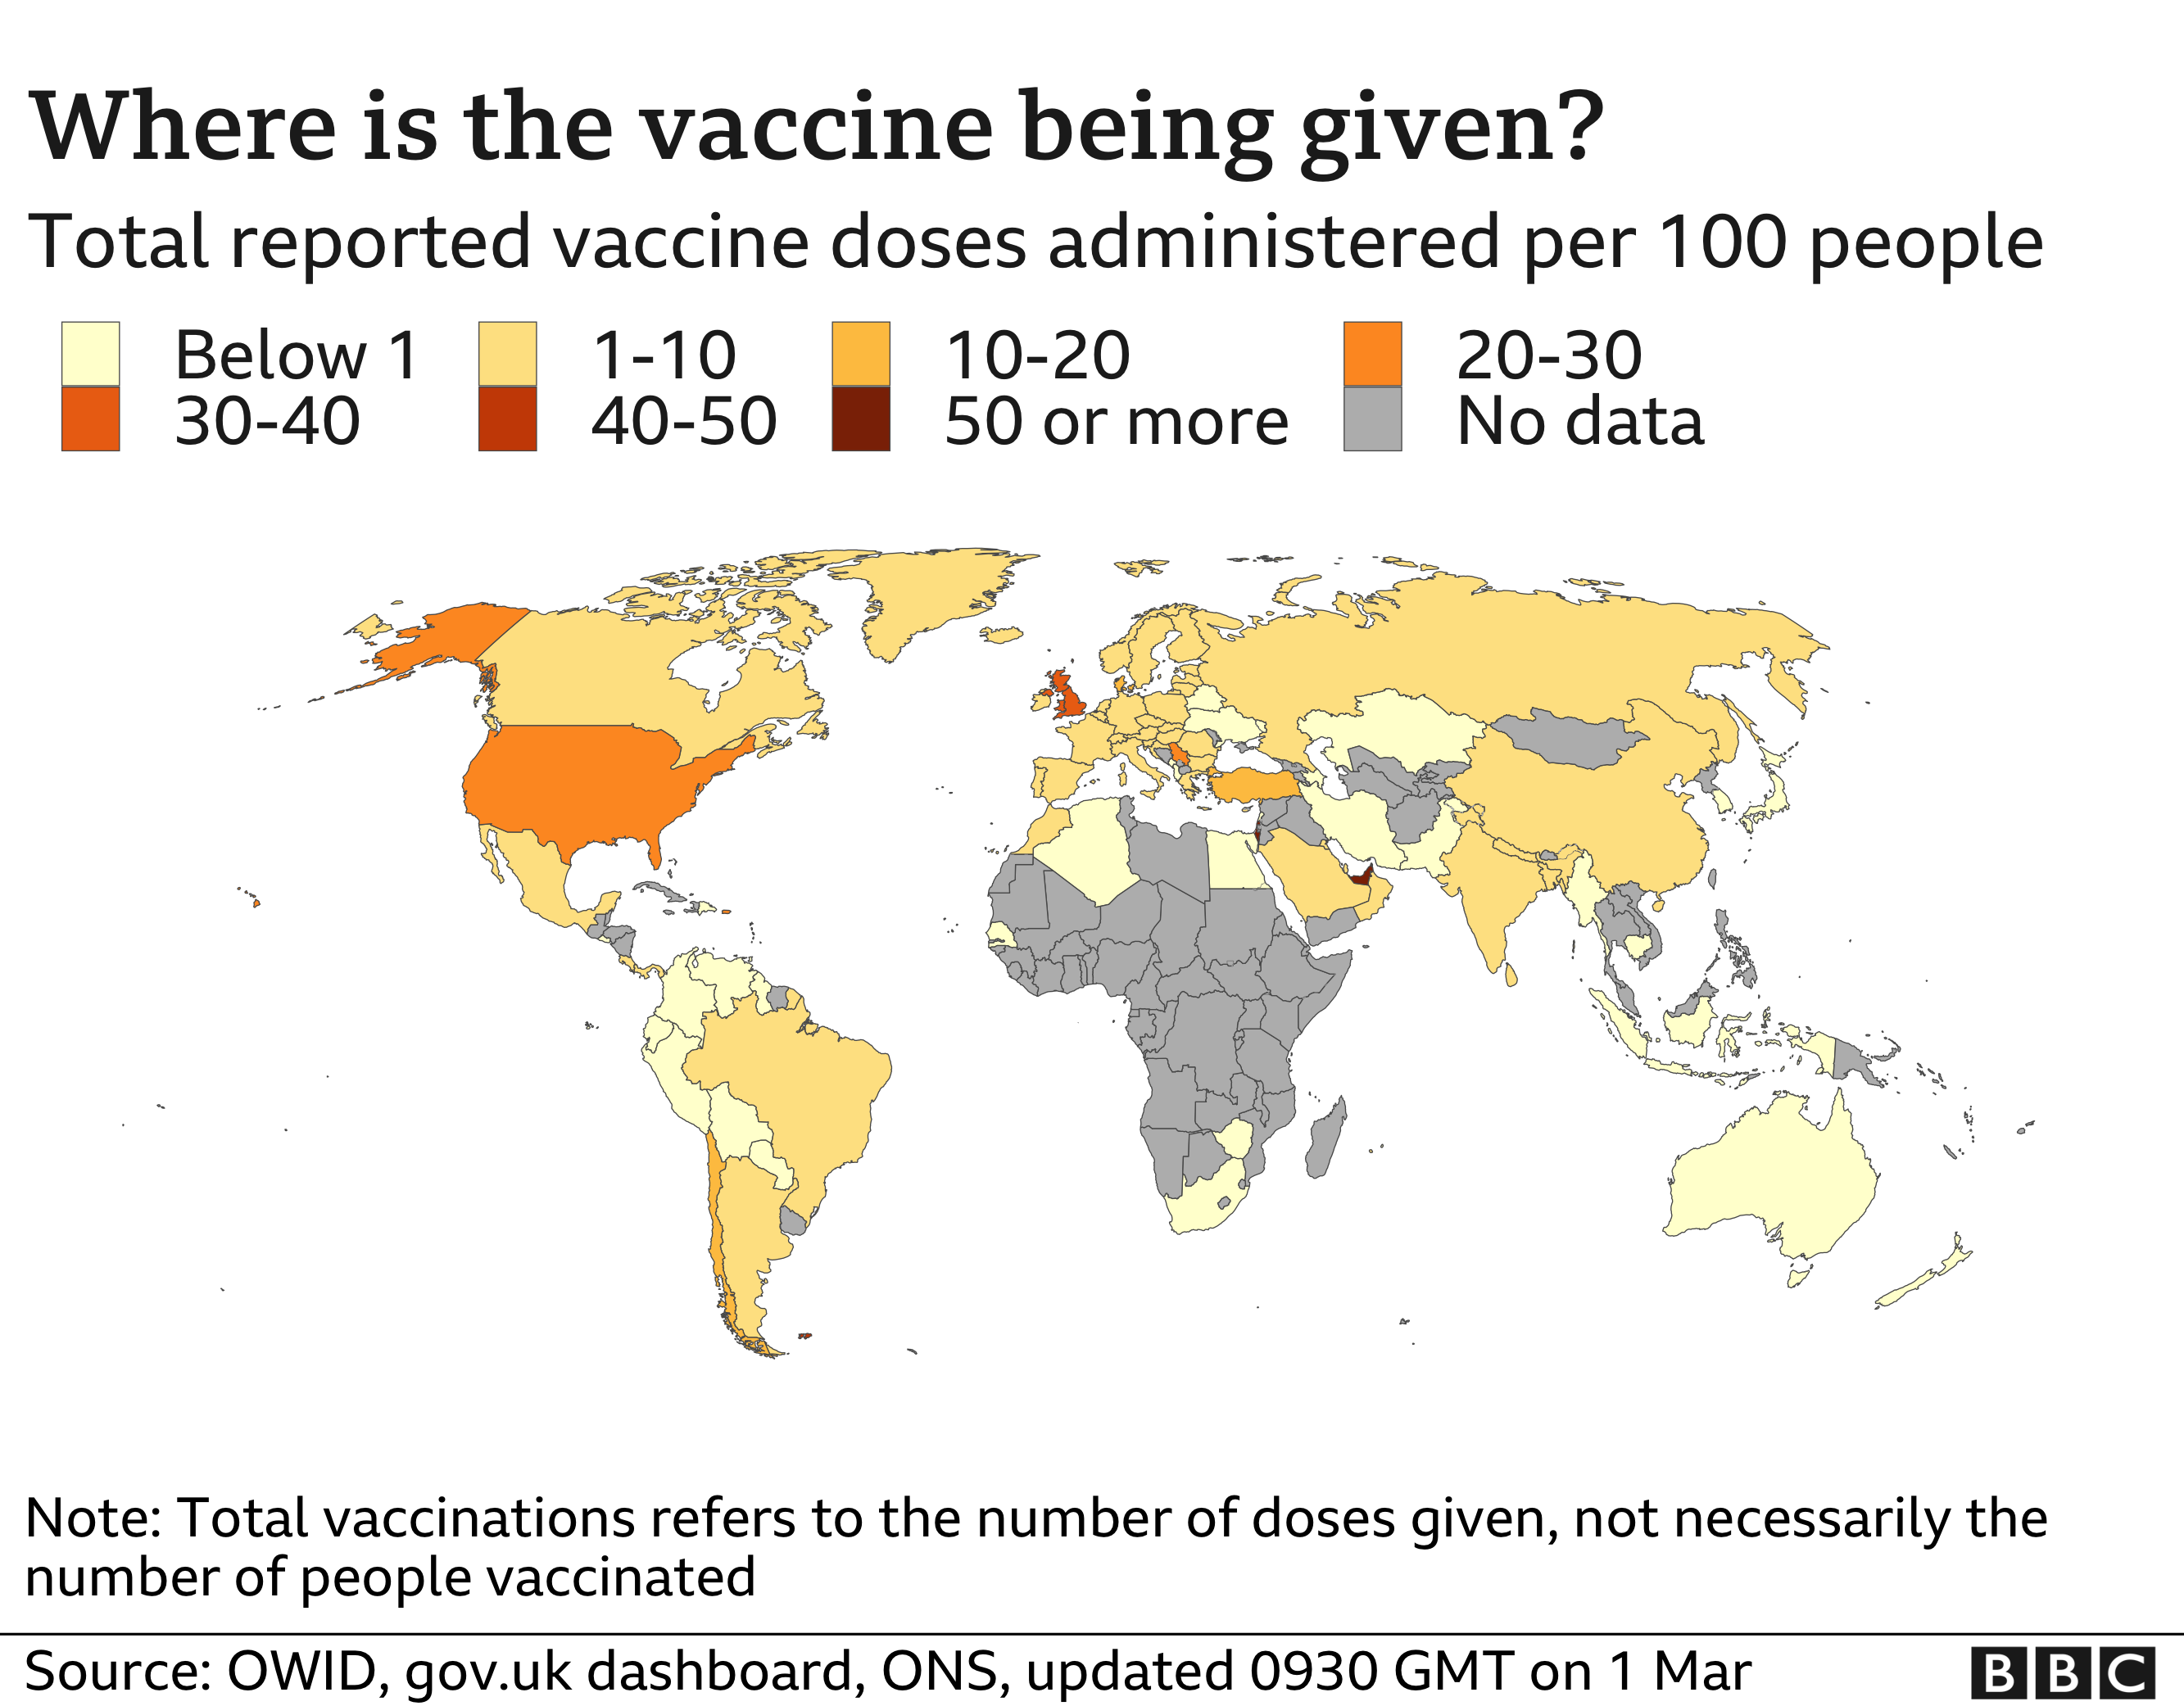 Map showing the number of vaccine doses administered per 100 people